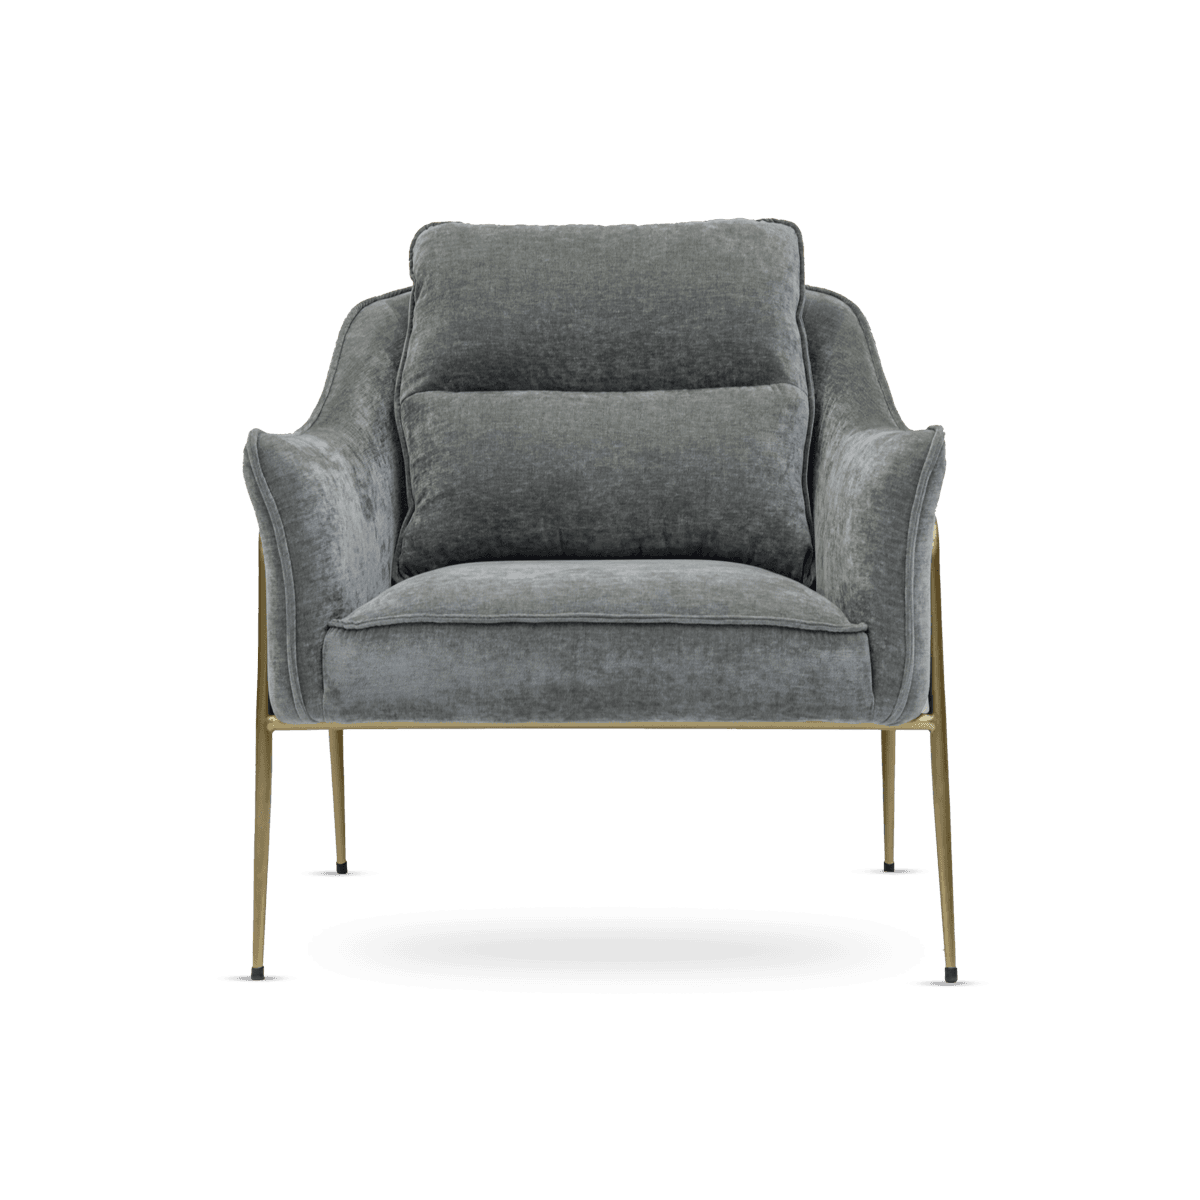 Torsion Lounge Chair Giselle Seamist